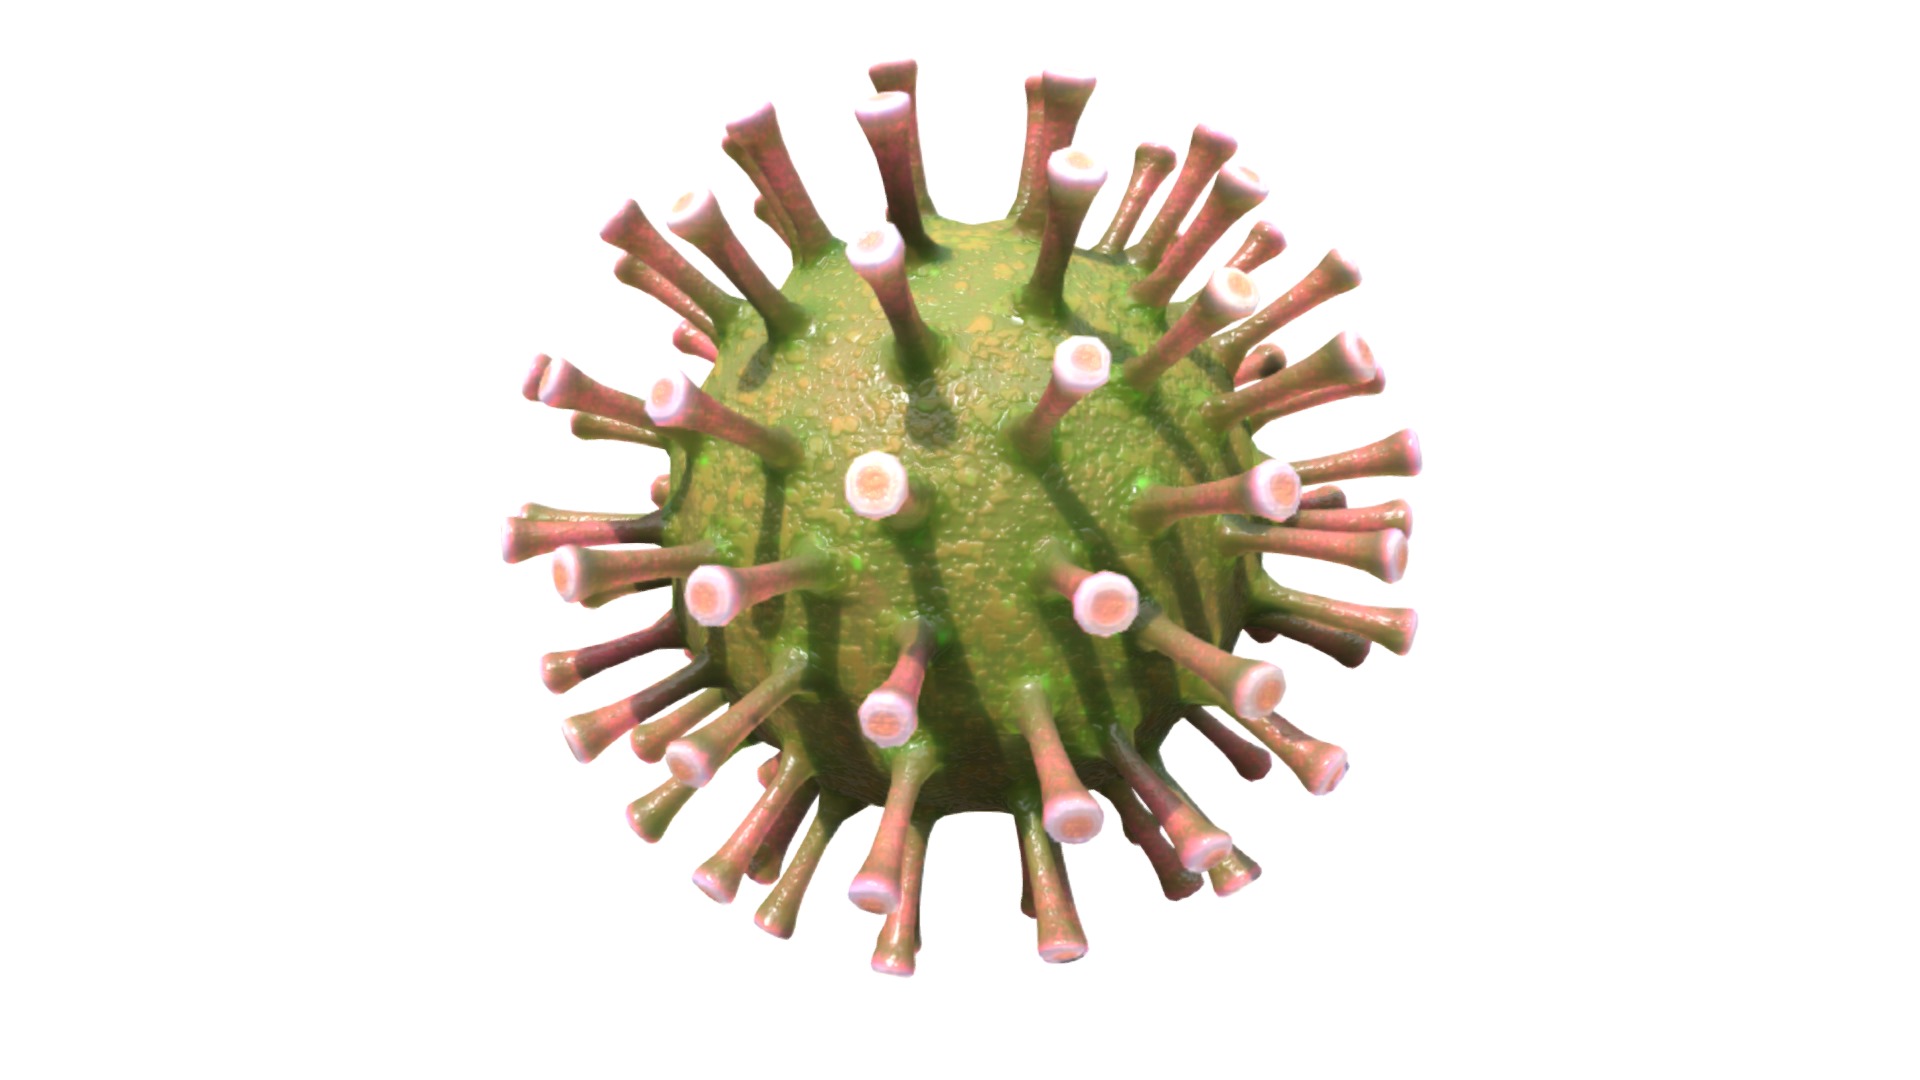 3D model Corona Virus Covid 19 - This is a 3D model of the Corona Virus Covid 19. The 3D model is about a close up of a plant.